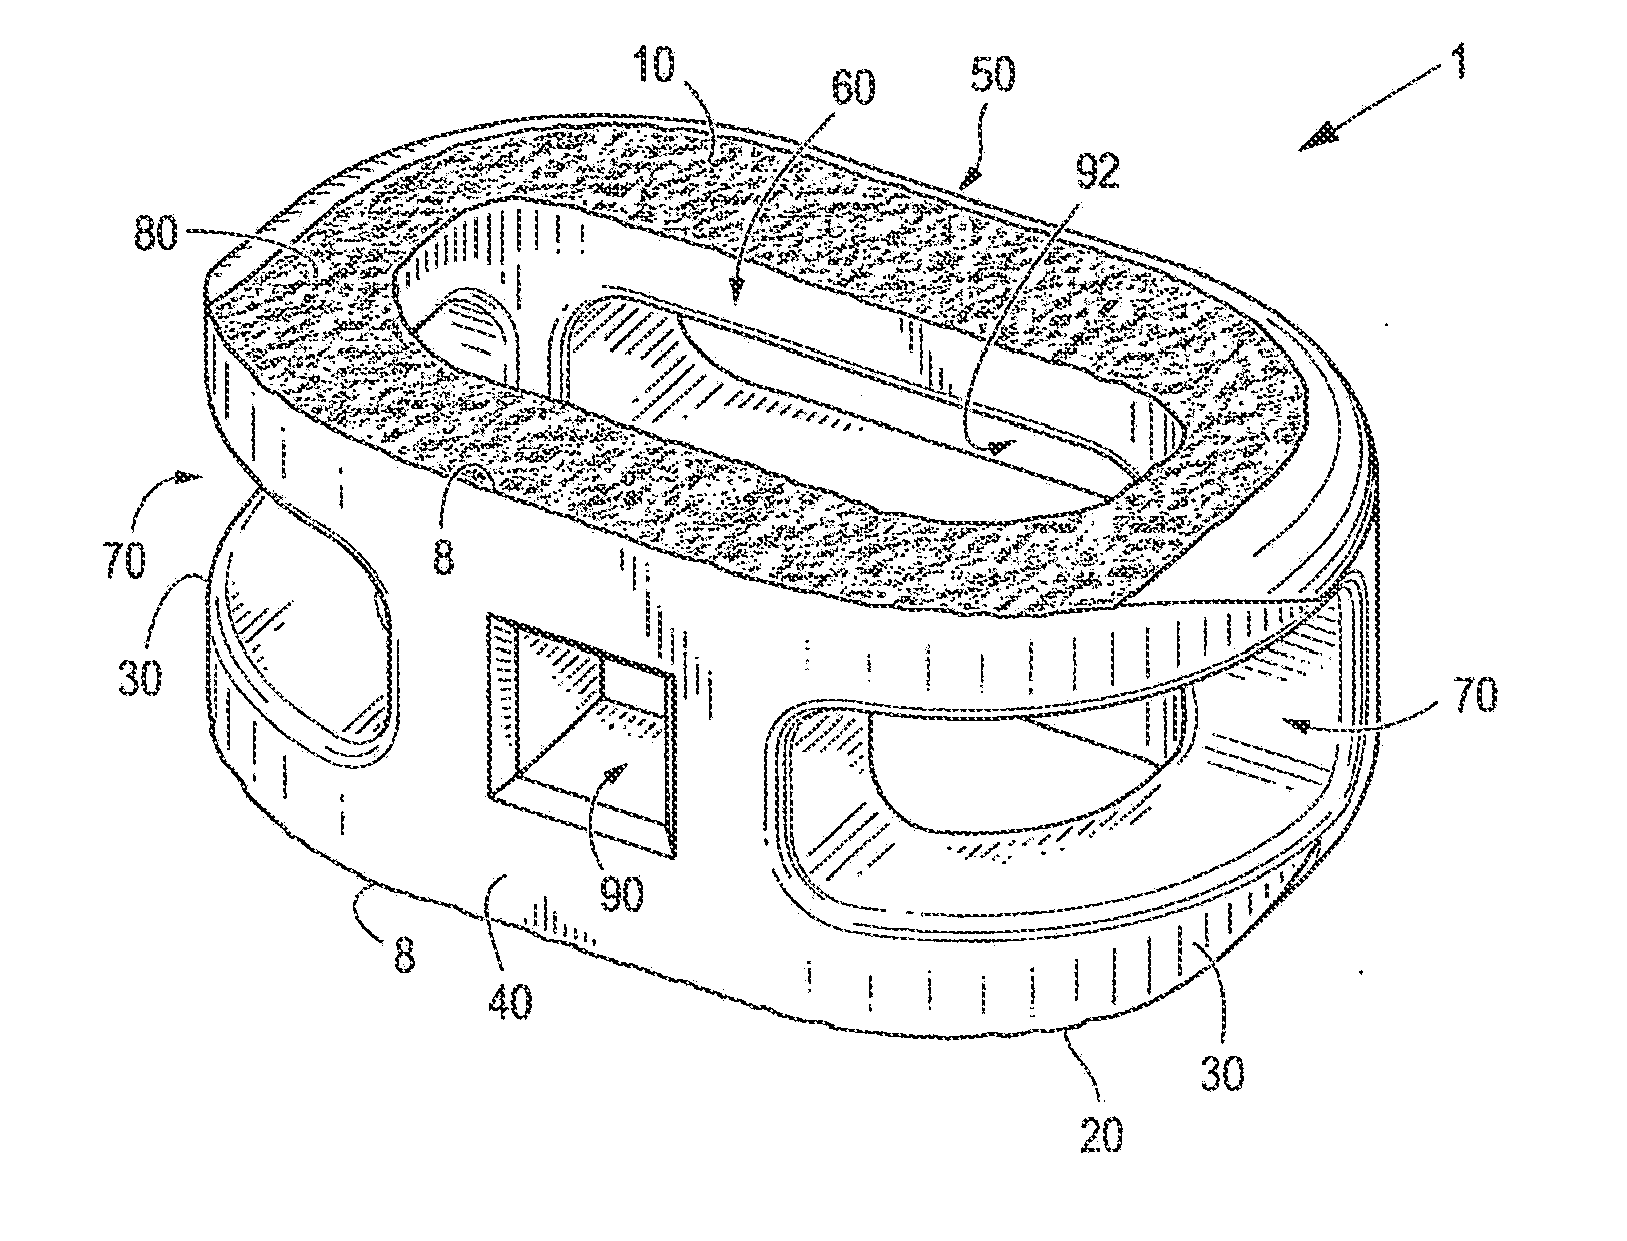 Implant with critical ratio of load bearing surface area to central opening area